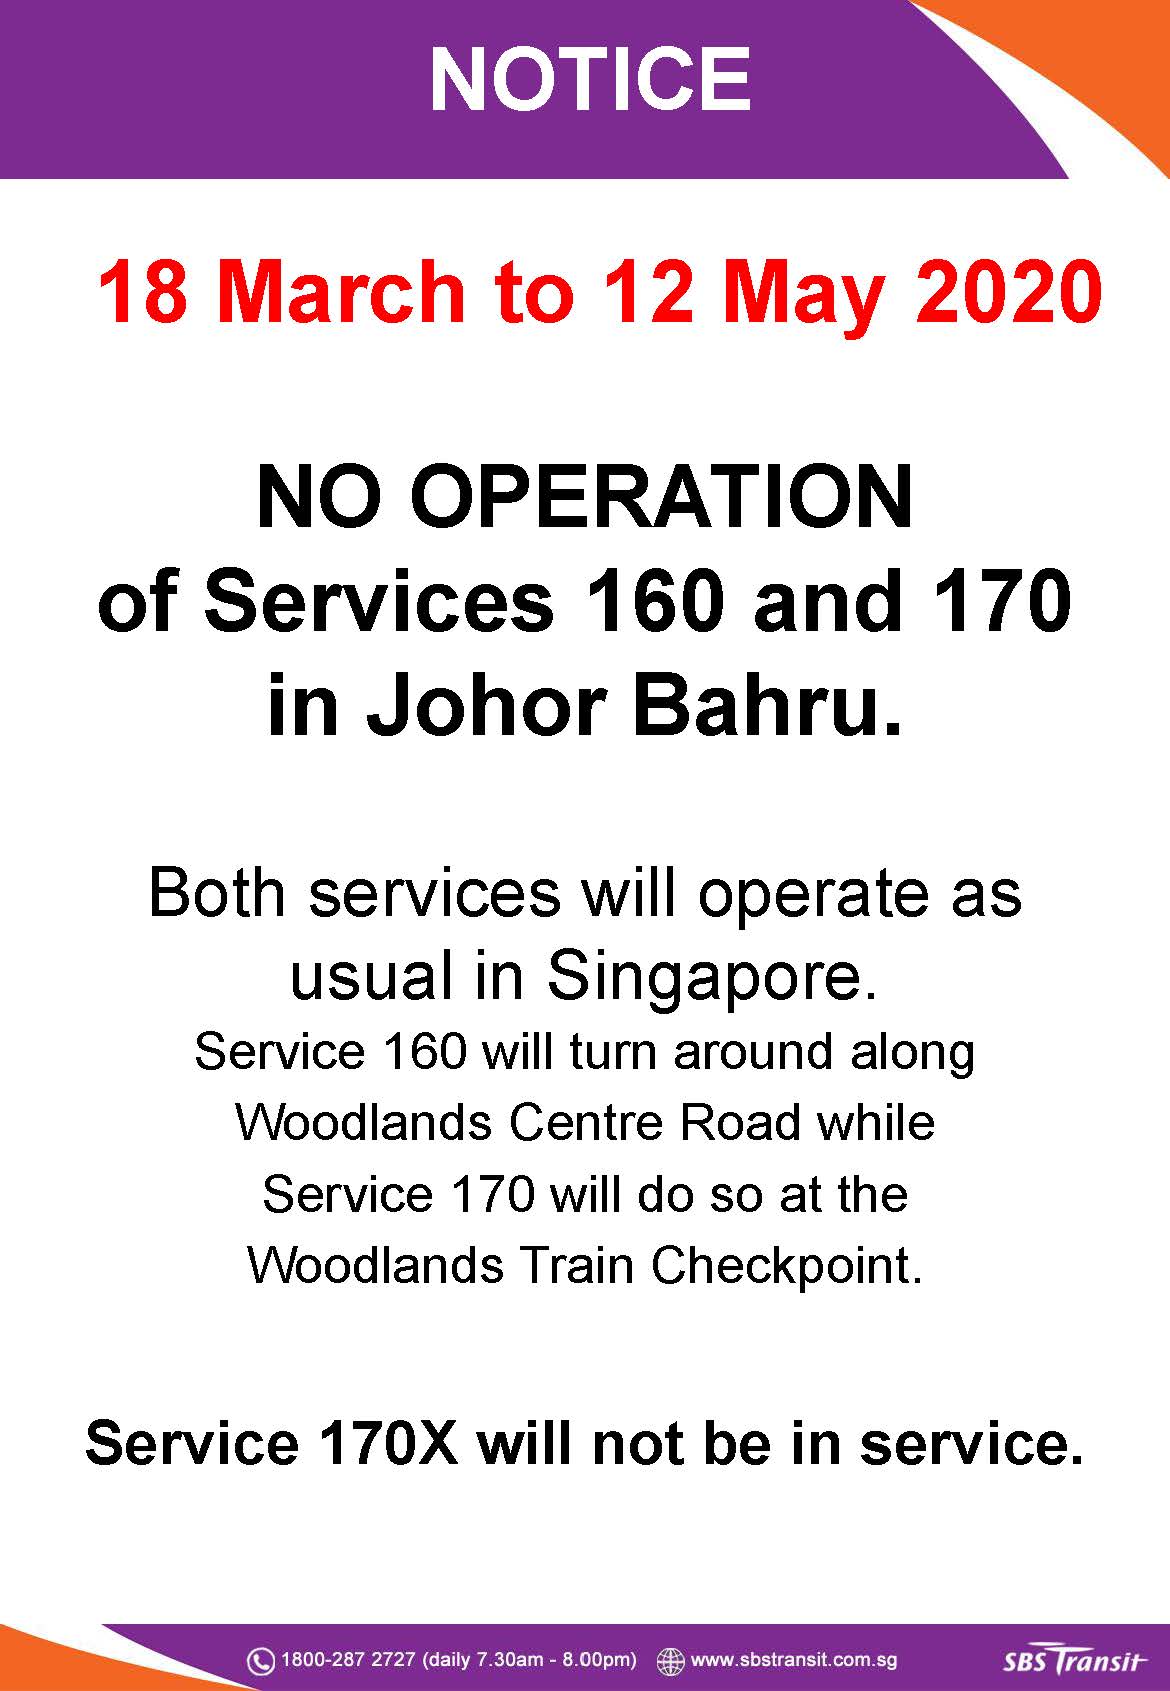 Official poster on operating status of SBS Transit bus services 160, 170 & 170X